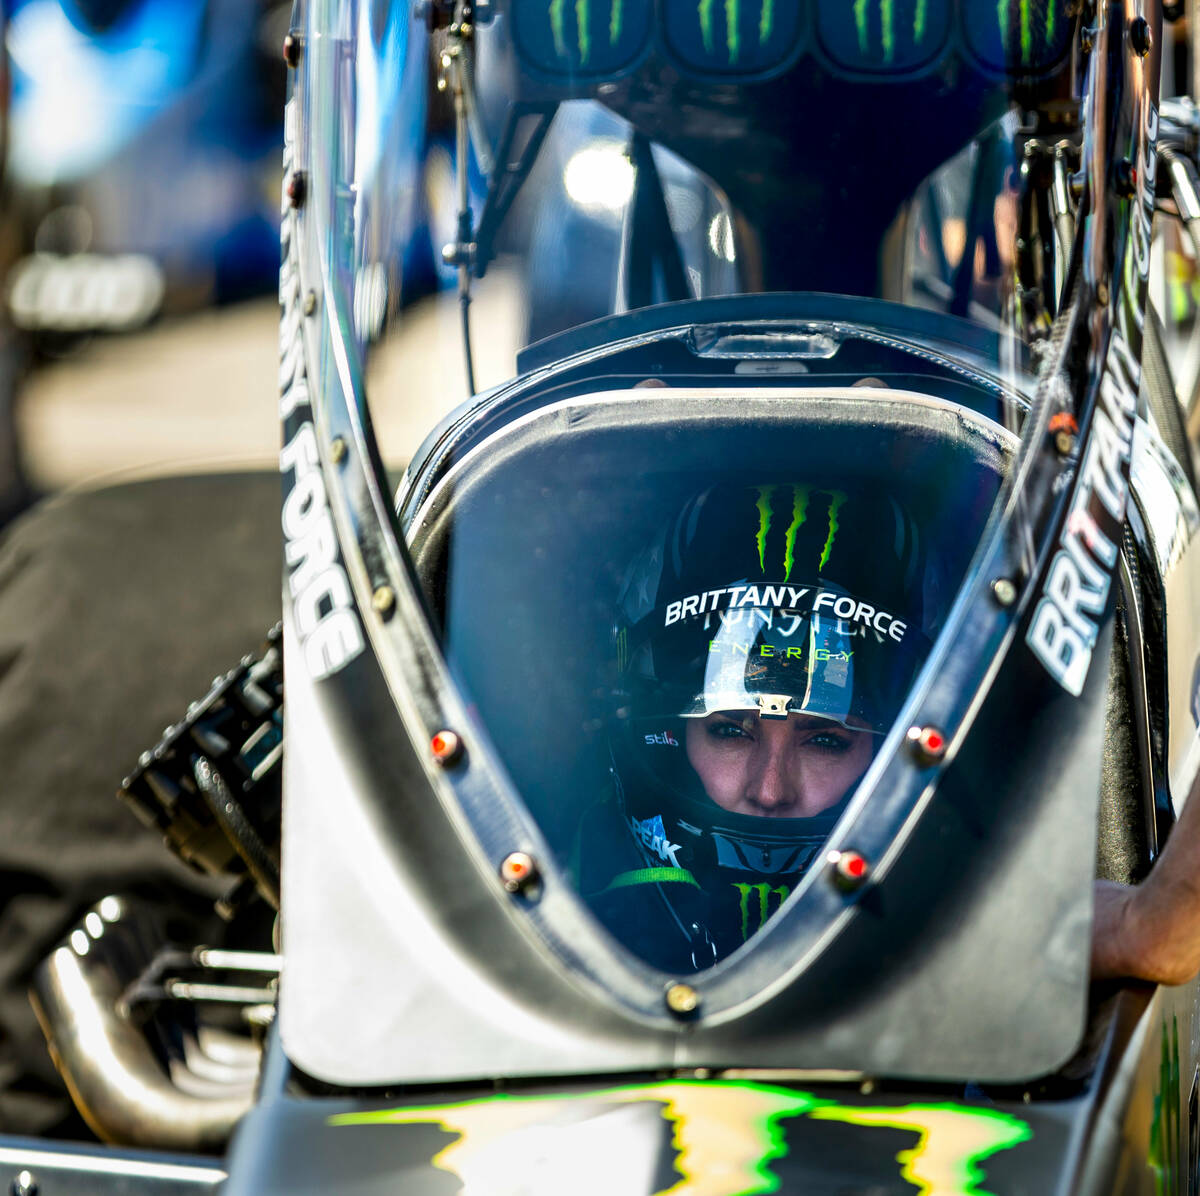 Top Fuel racer Brittany Force awaits her first race during Day 1 of NHRA 4-Wide Nationals on &q ...